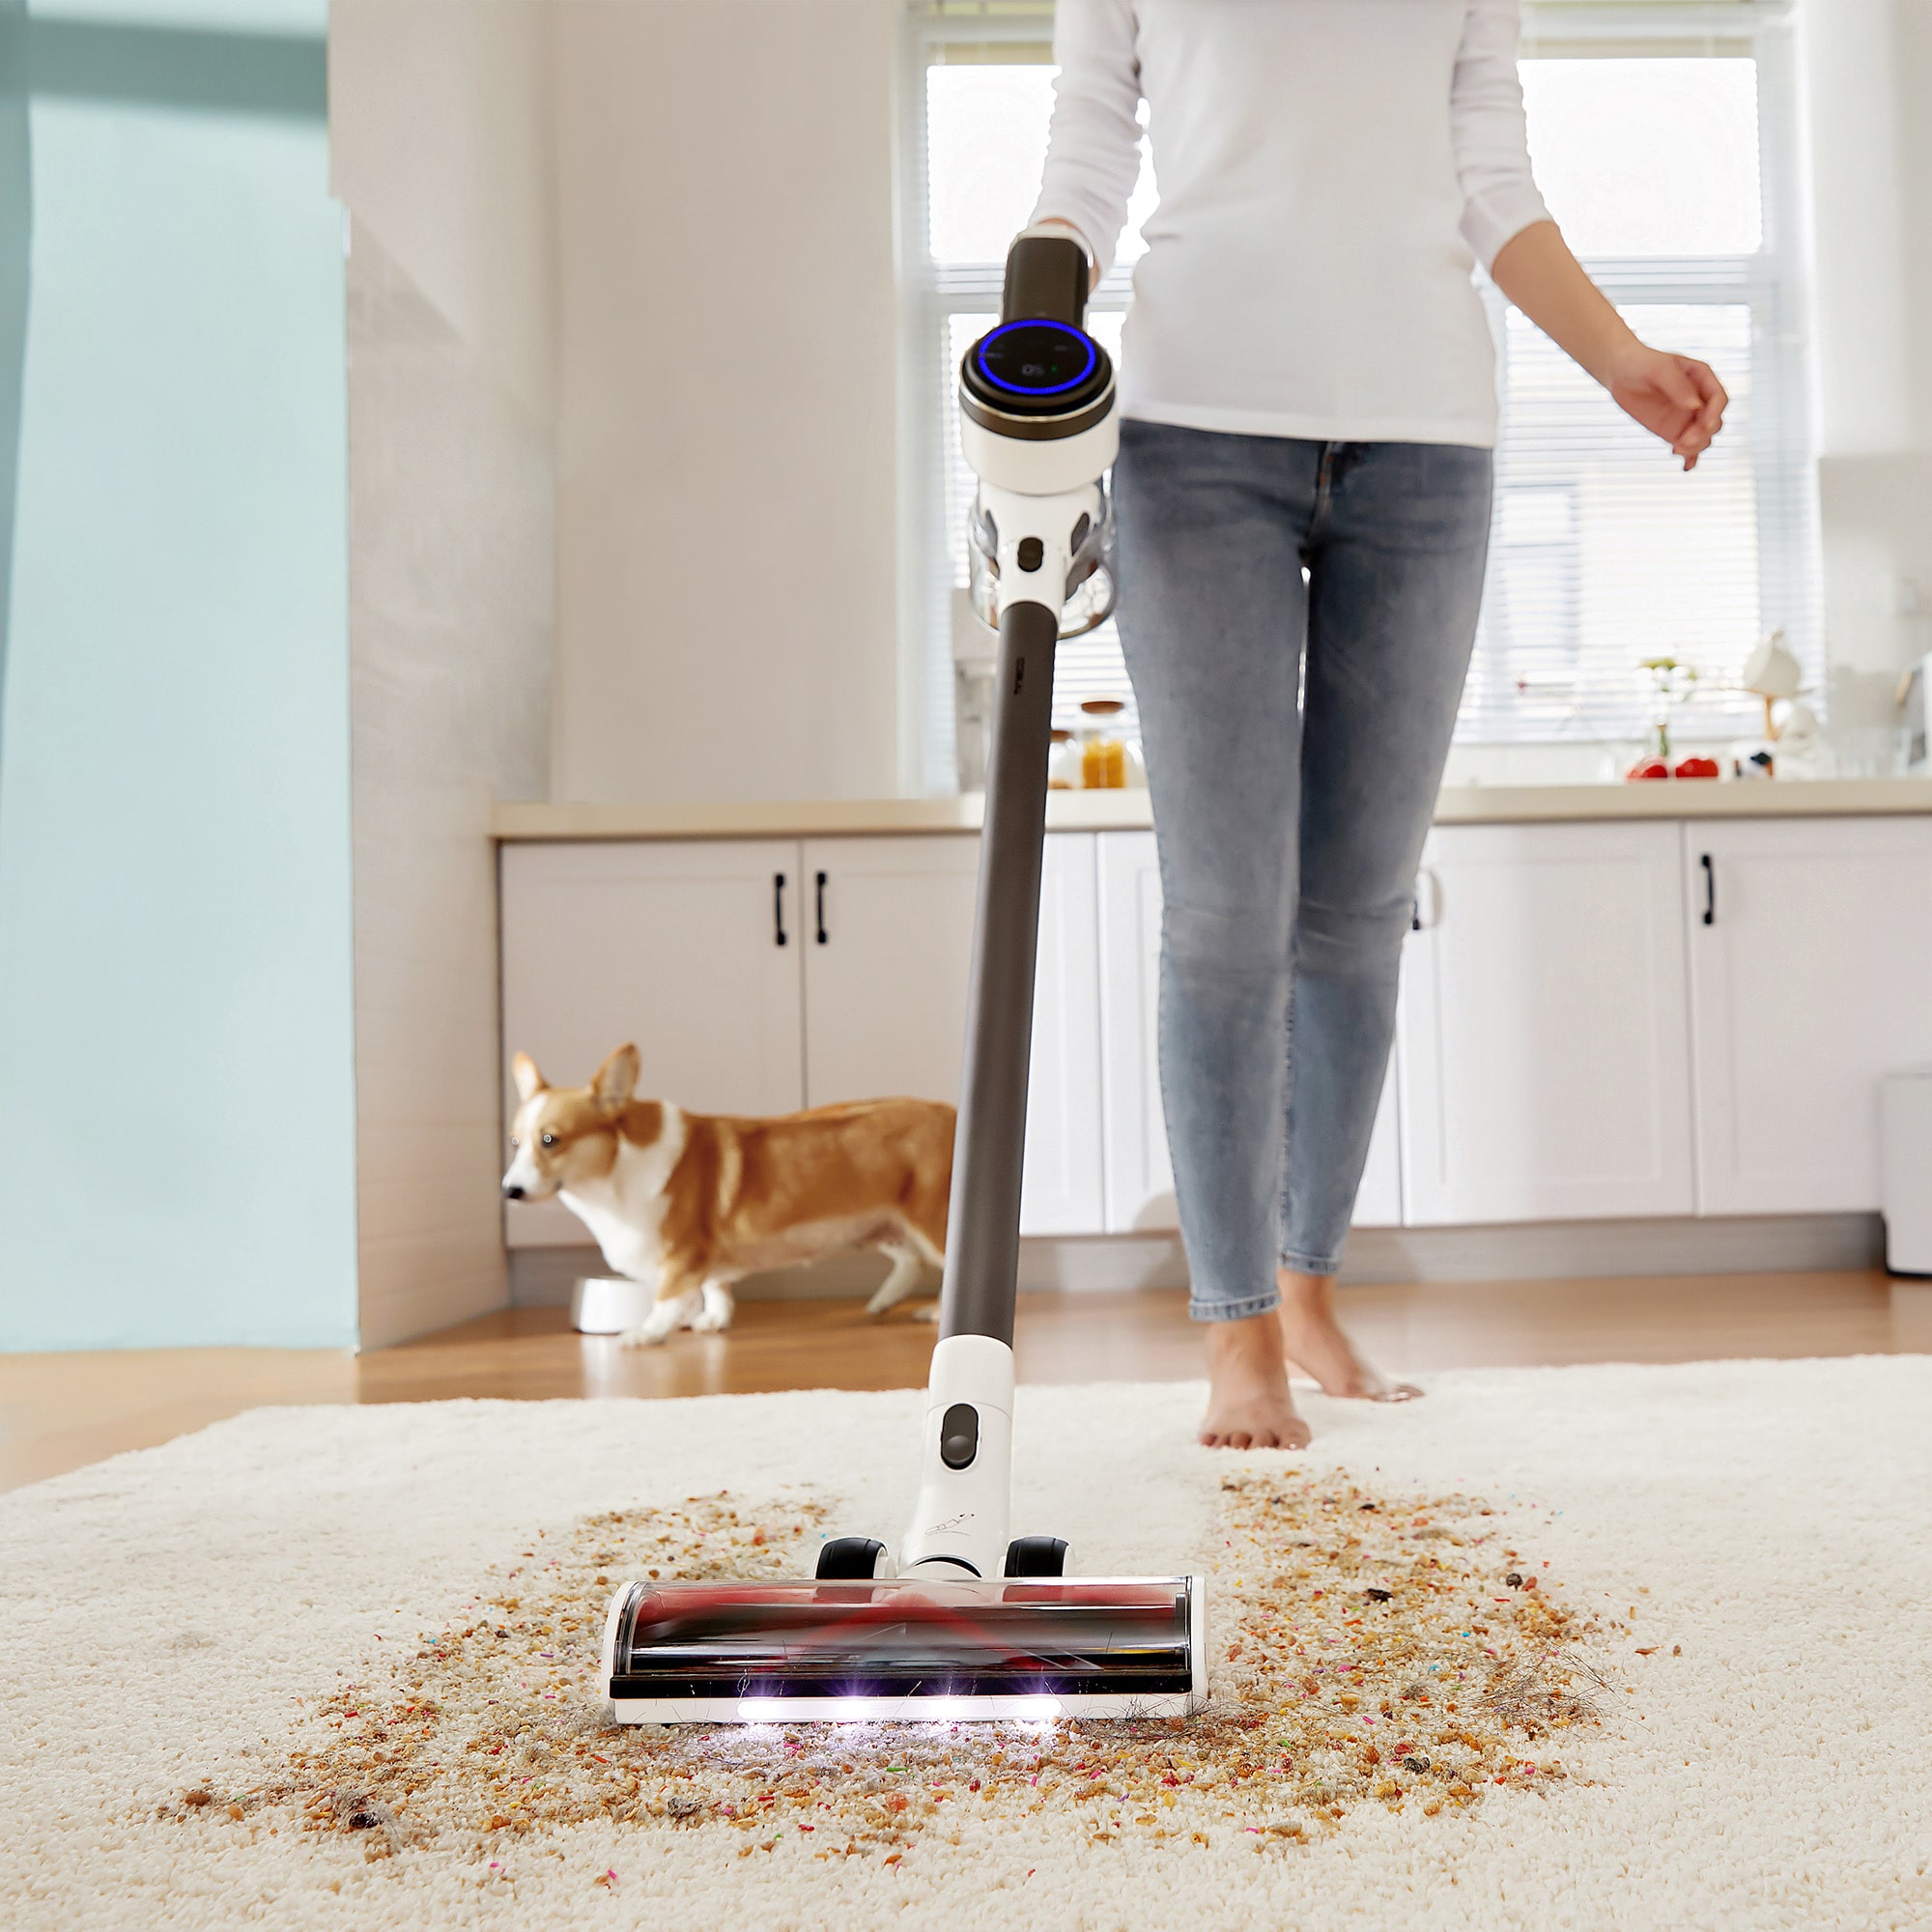 Winter Sale: Save Up to 35% on Tineco Smart Wet-Dry Vacuums